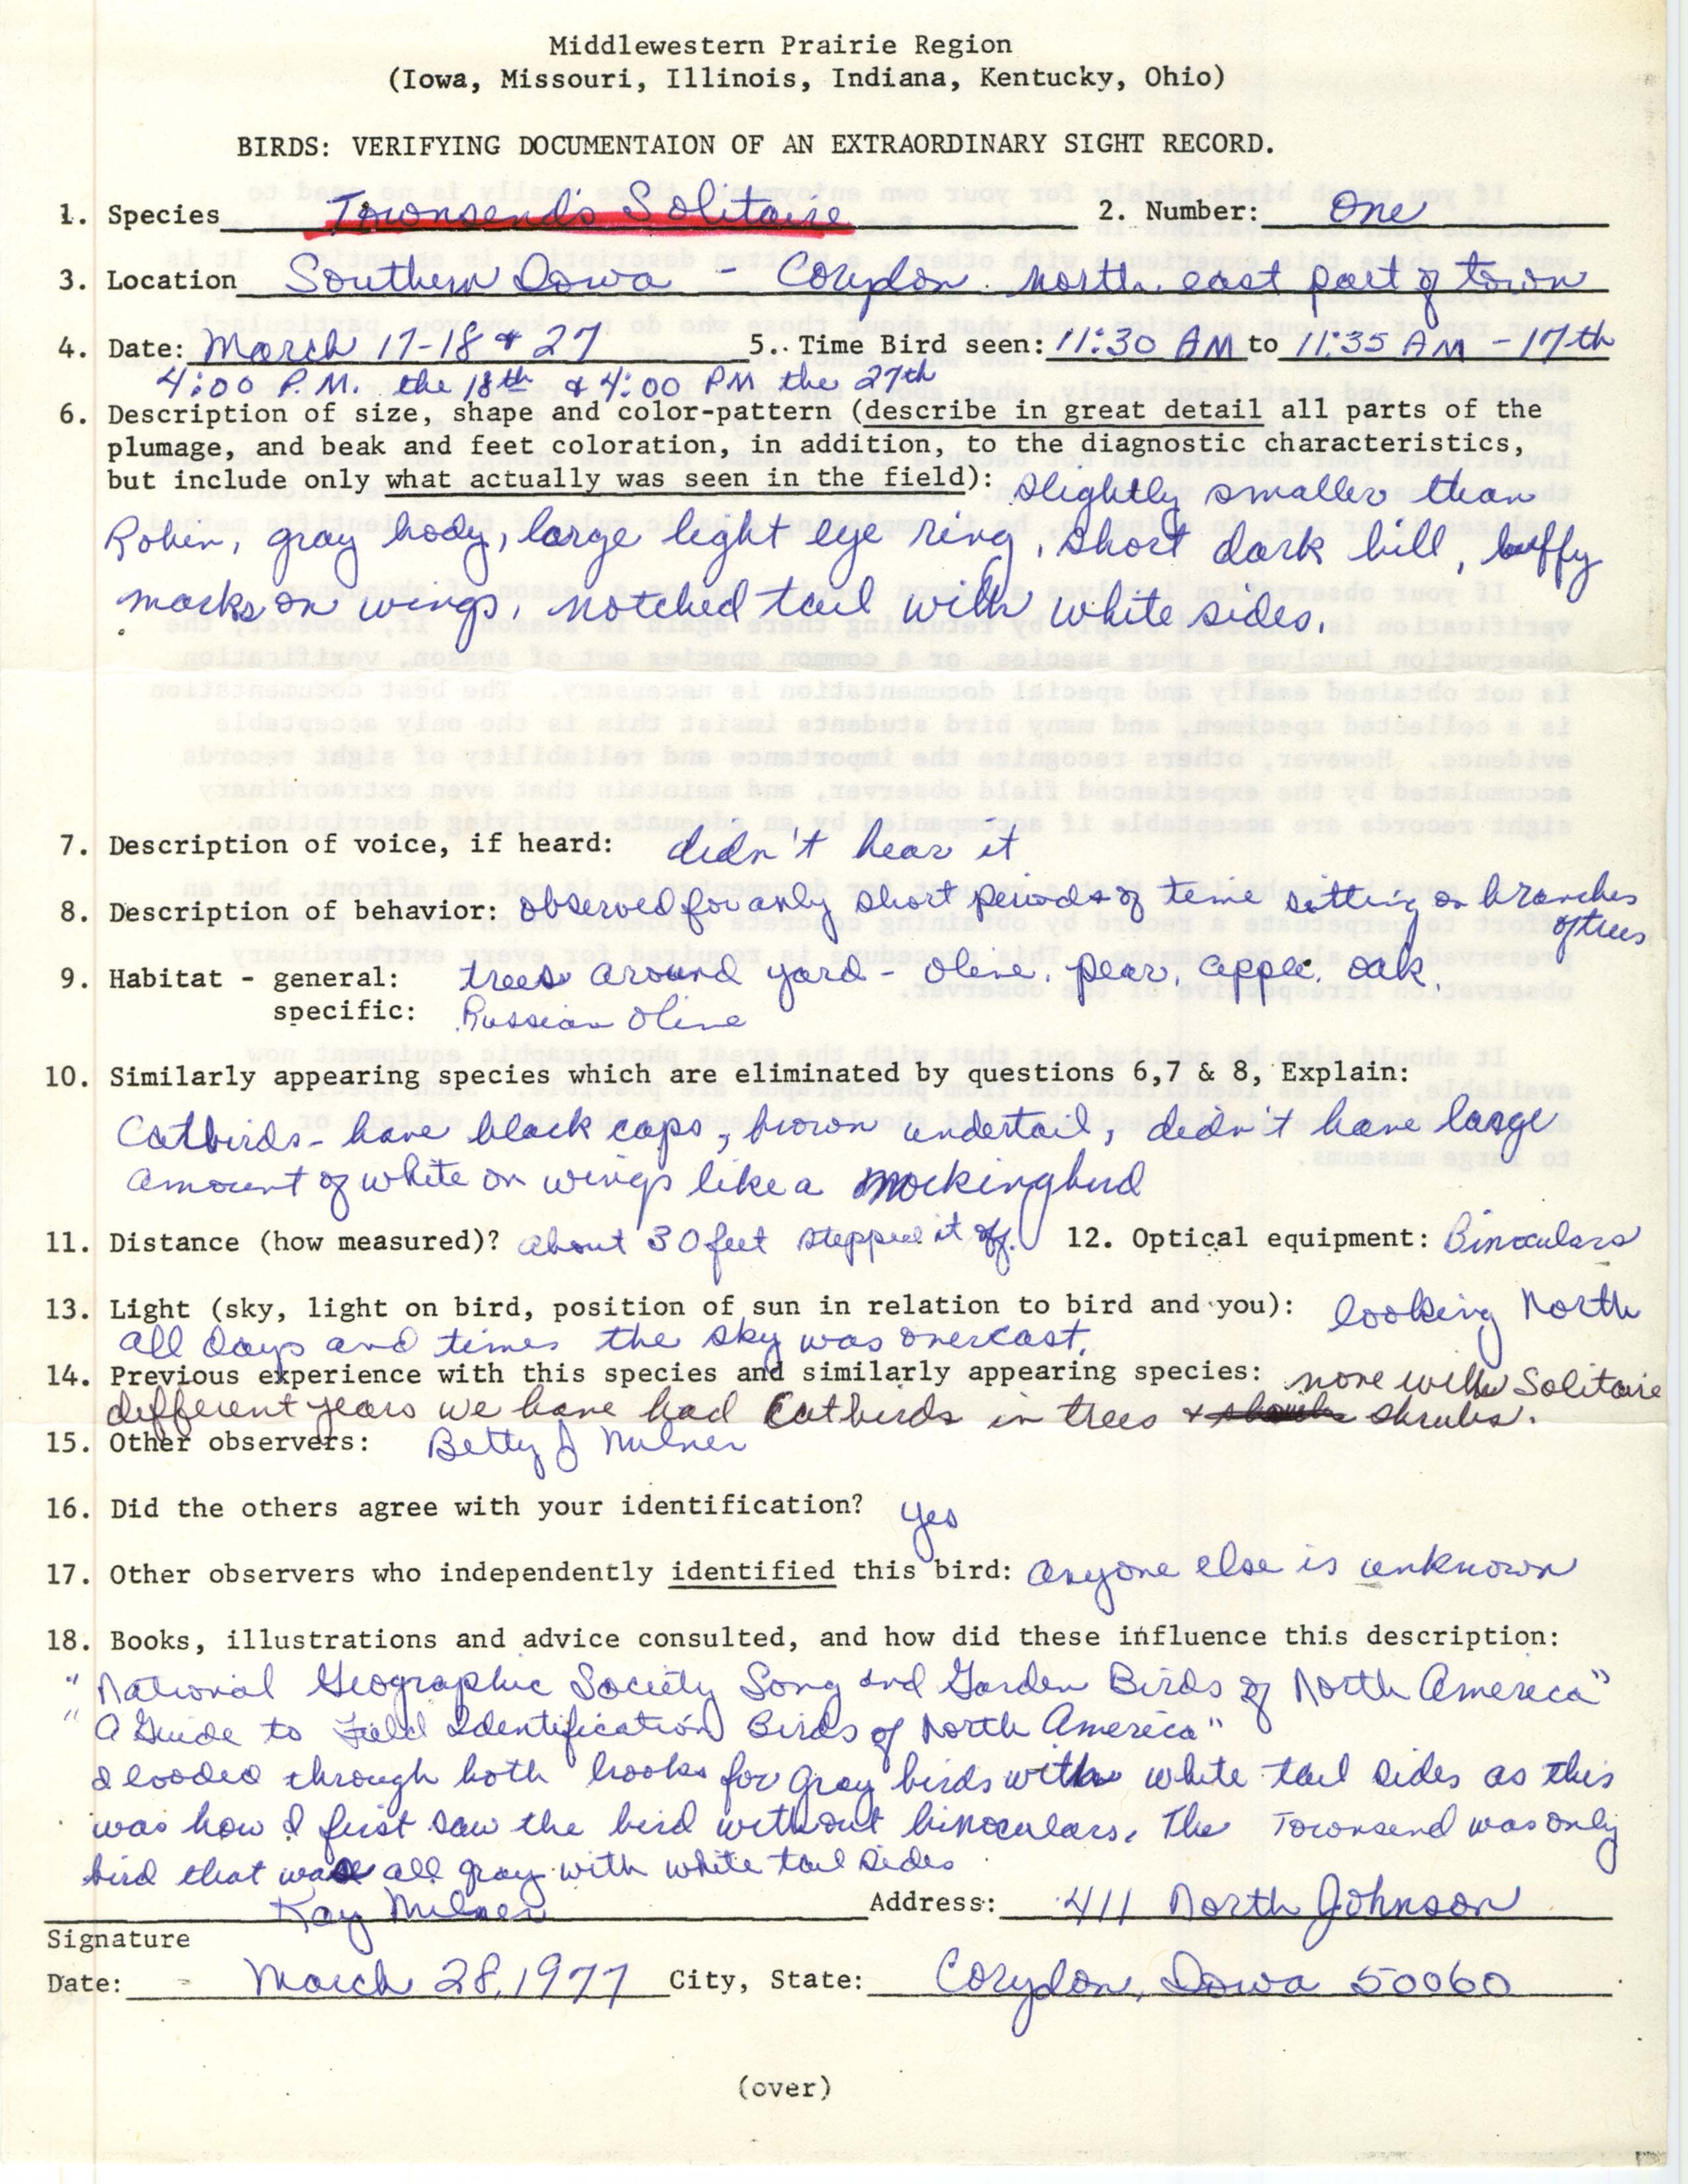 Rare bird documentation form for Townsend's Solitaire northeast of Corydon in 1977